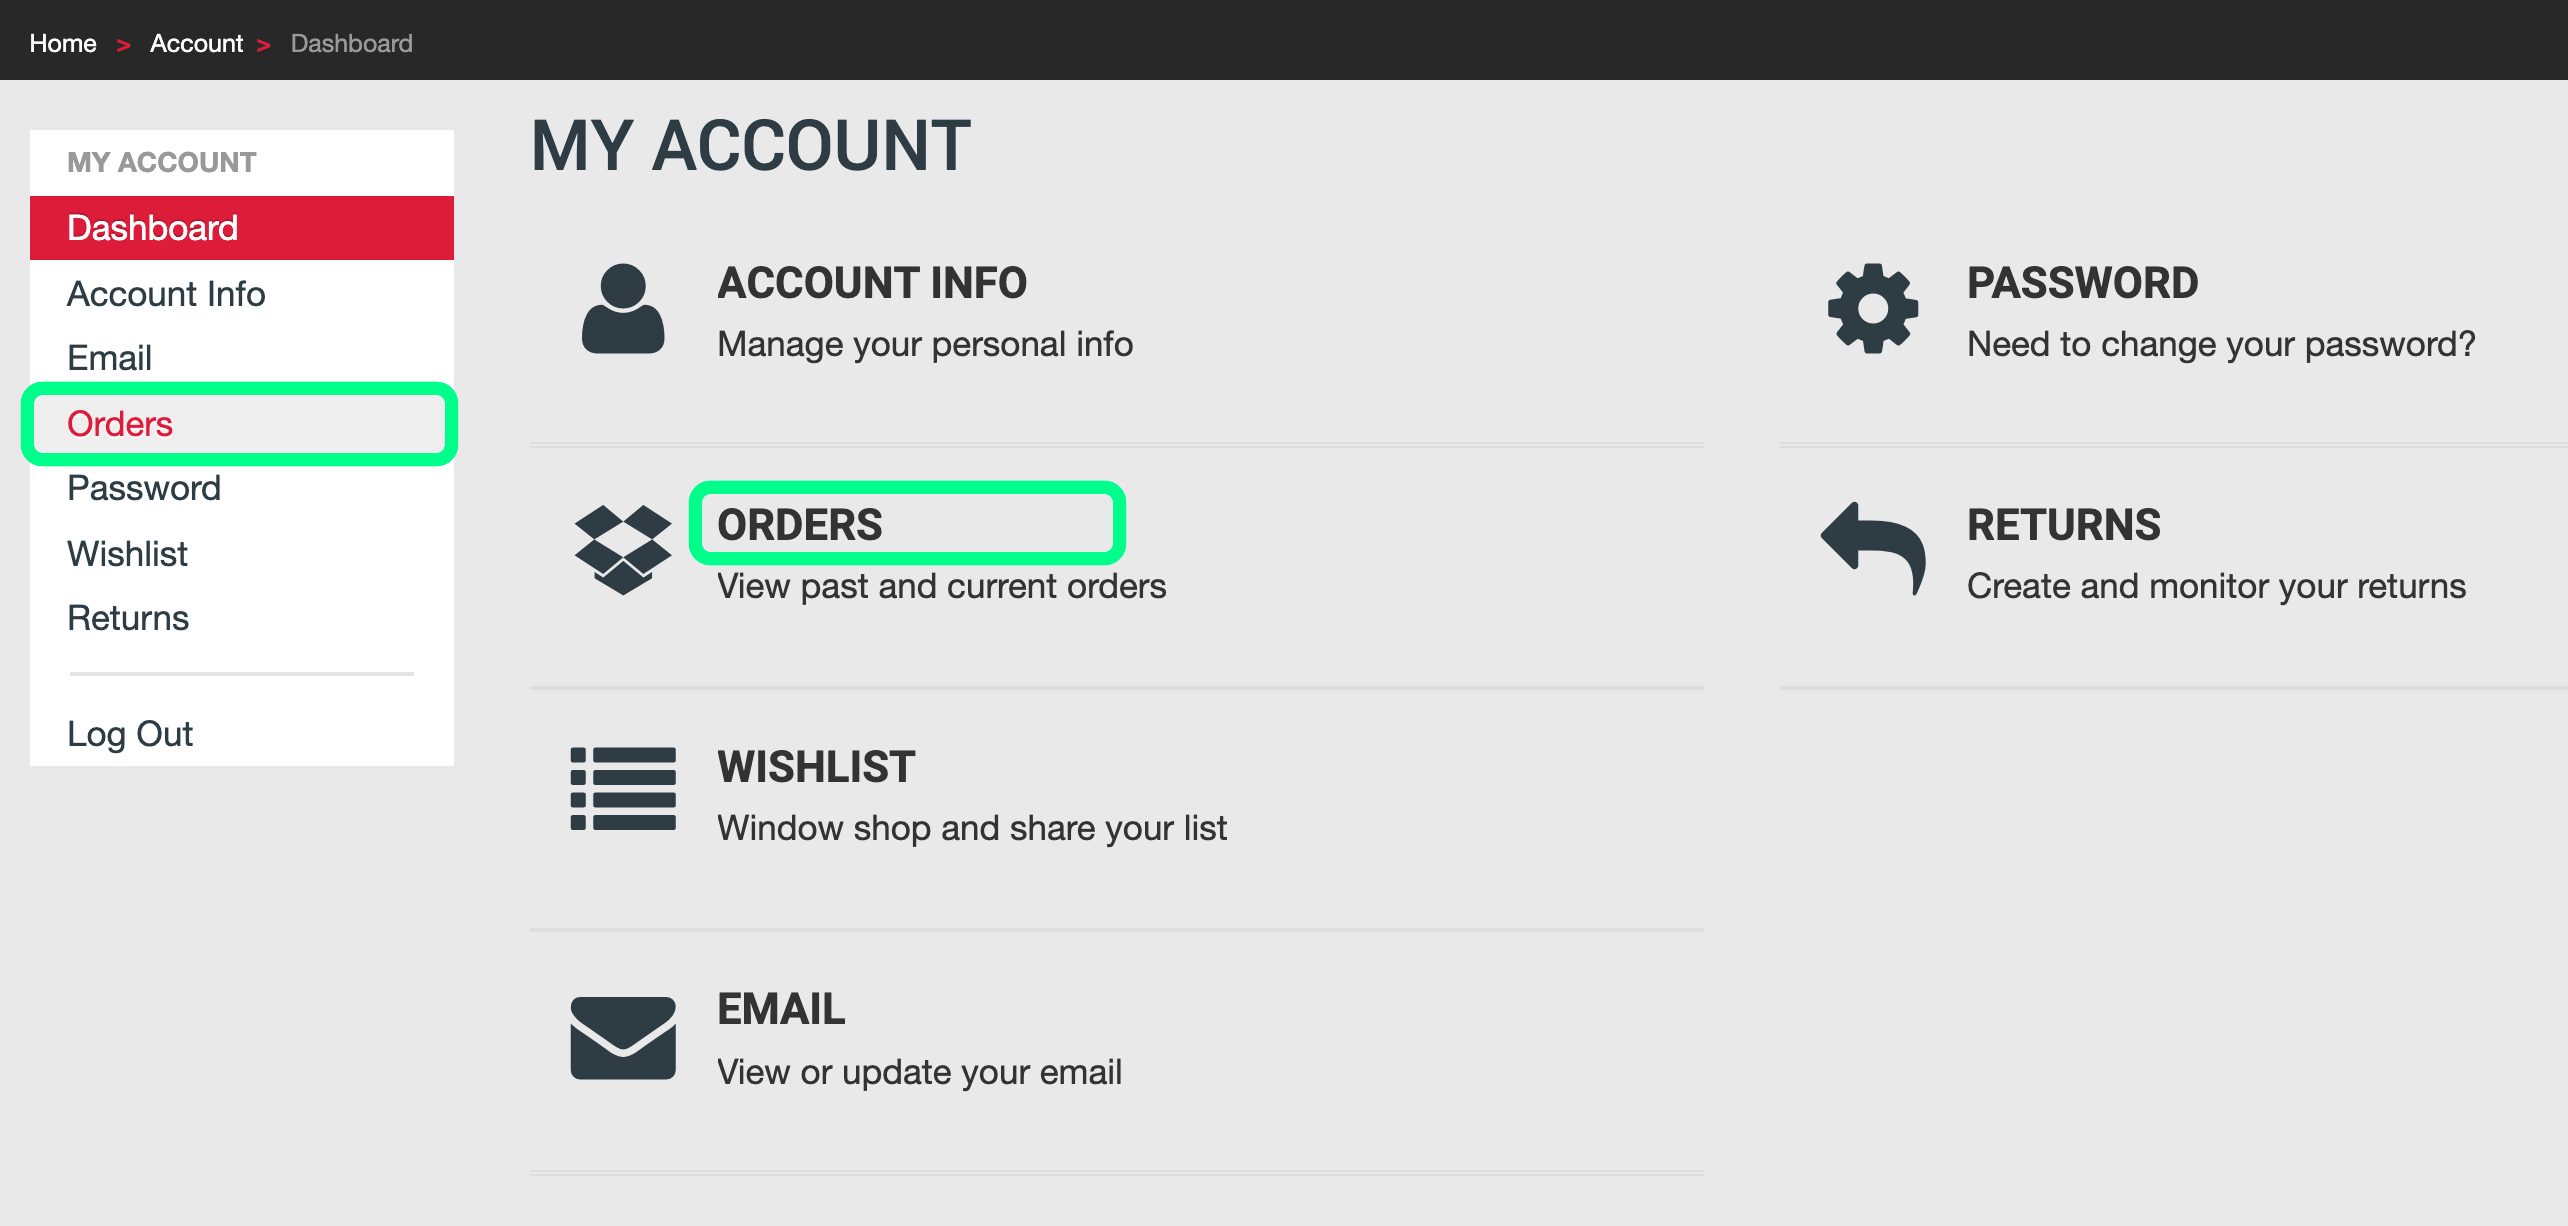 How to Cancel My Order With LMR - How to Cancel My Order With LMR